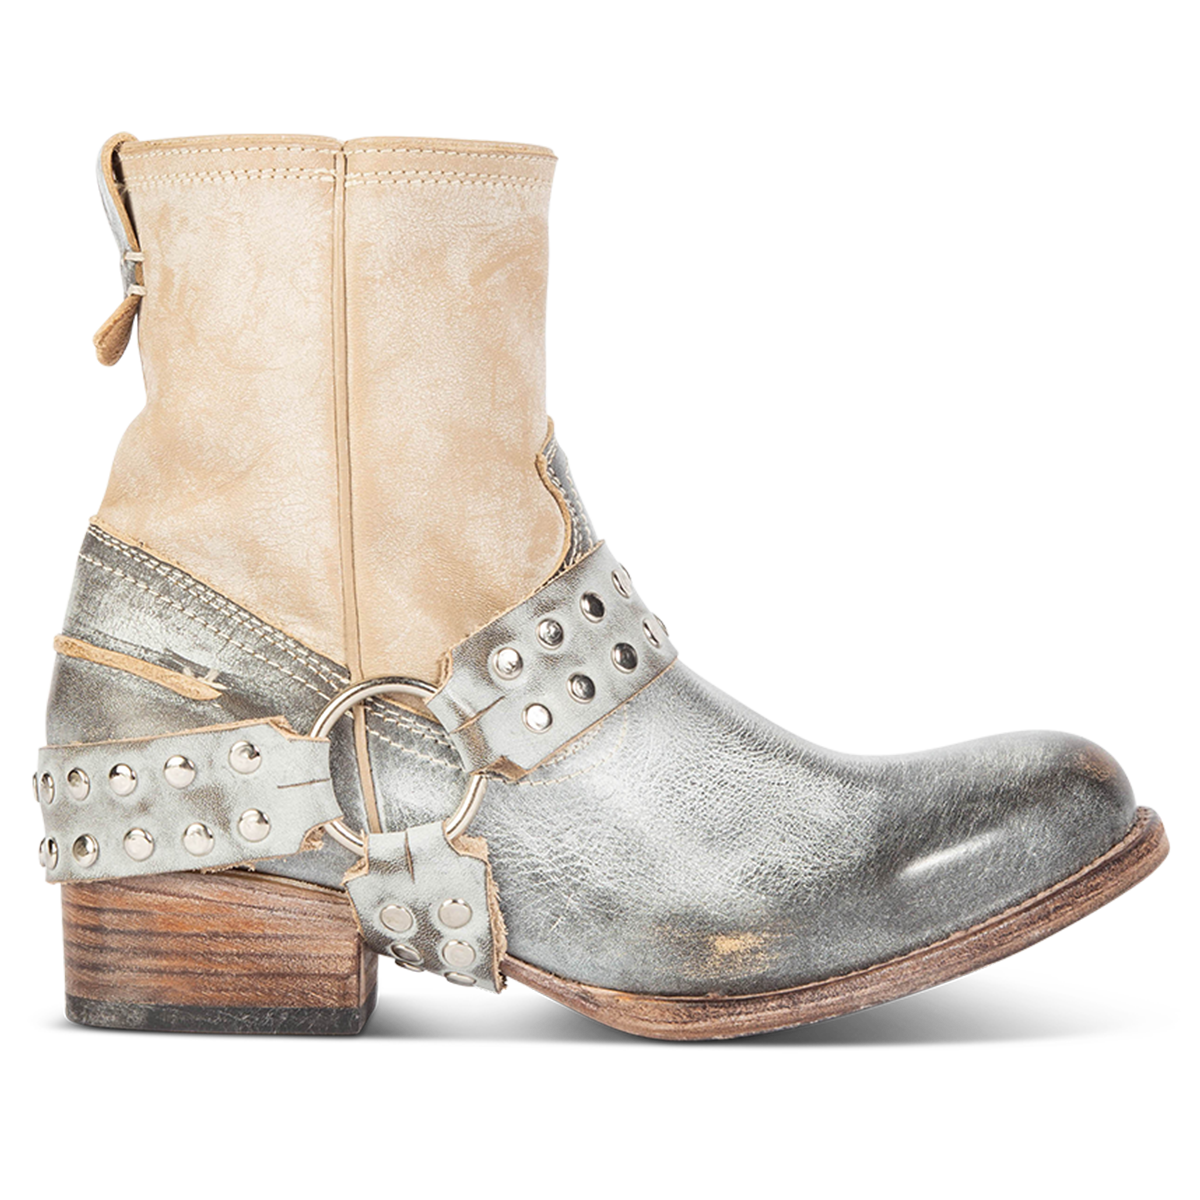 FREEBIRD women's Ramone ice multi full grain leather western crown bootie with inside zip closure and embellished harness